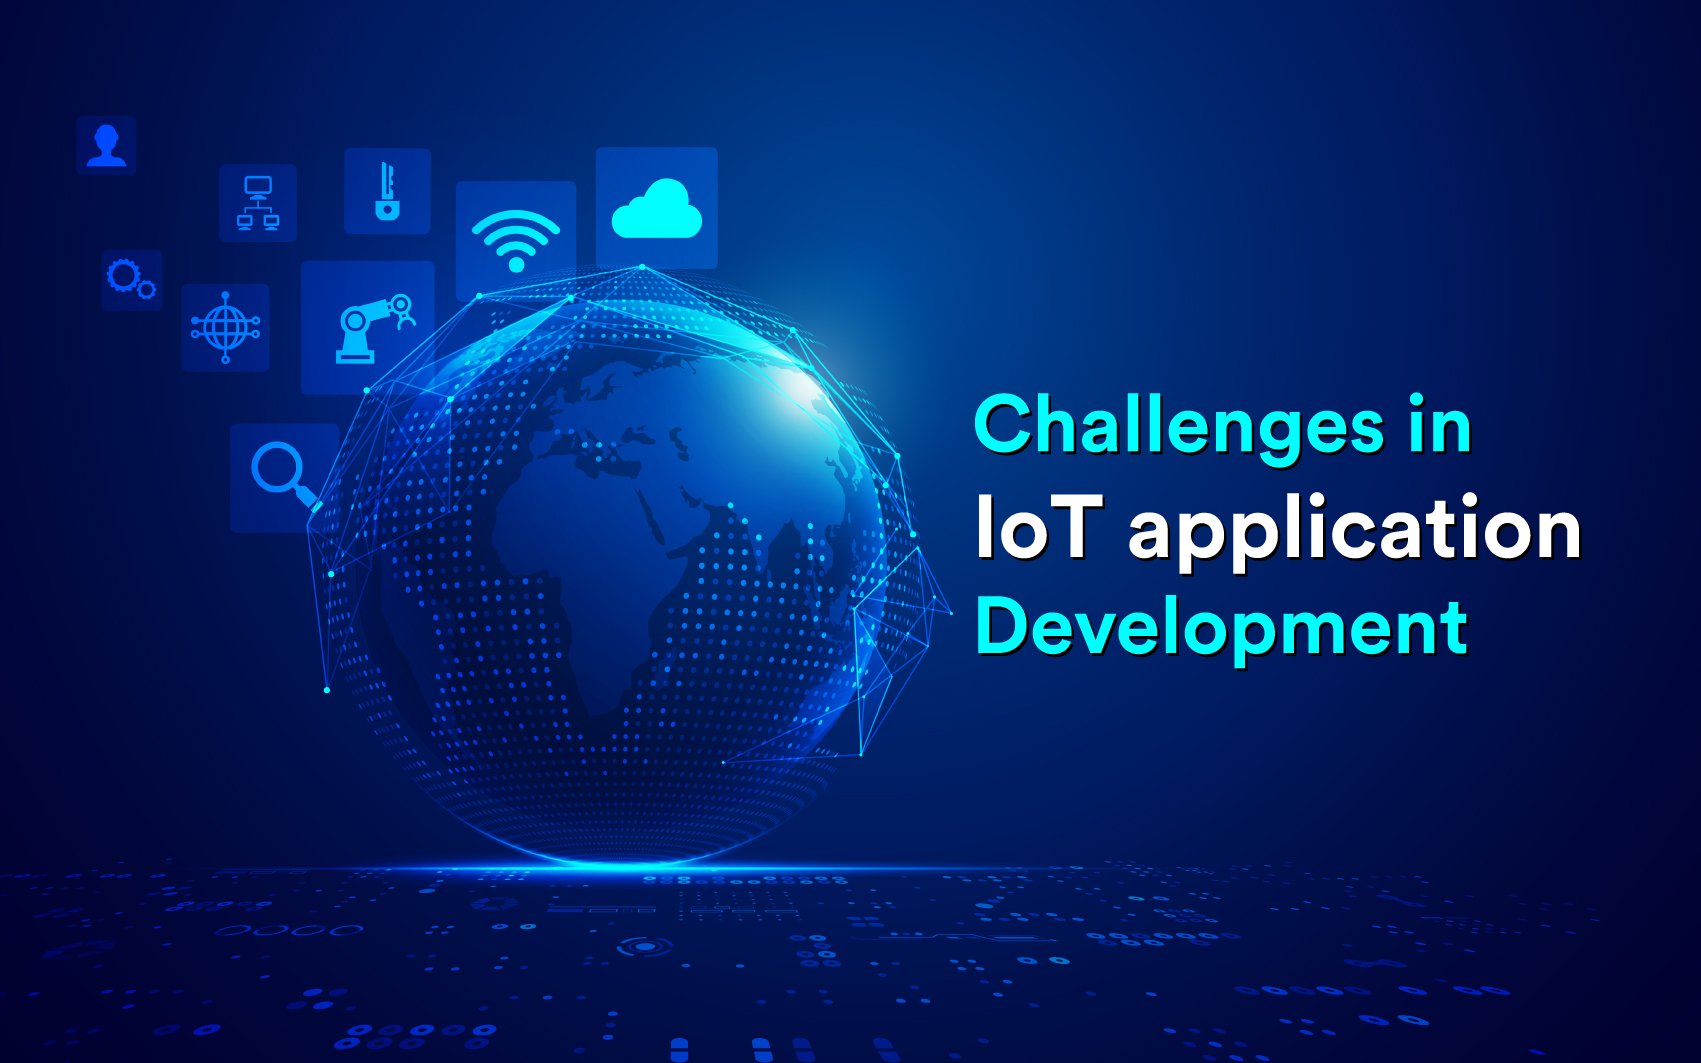 What are the Challenges in IoT Application Development ?